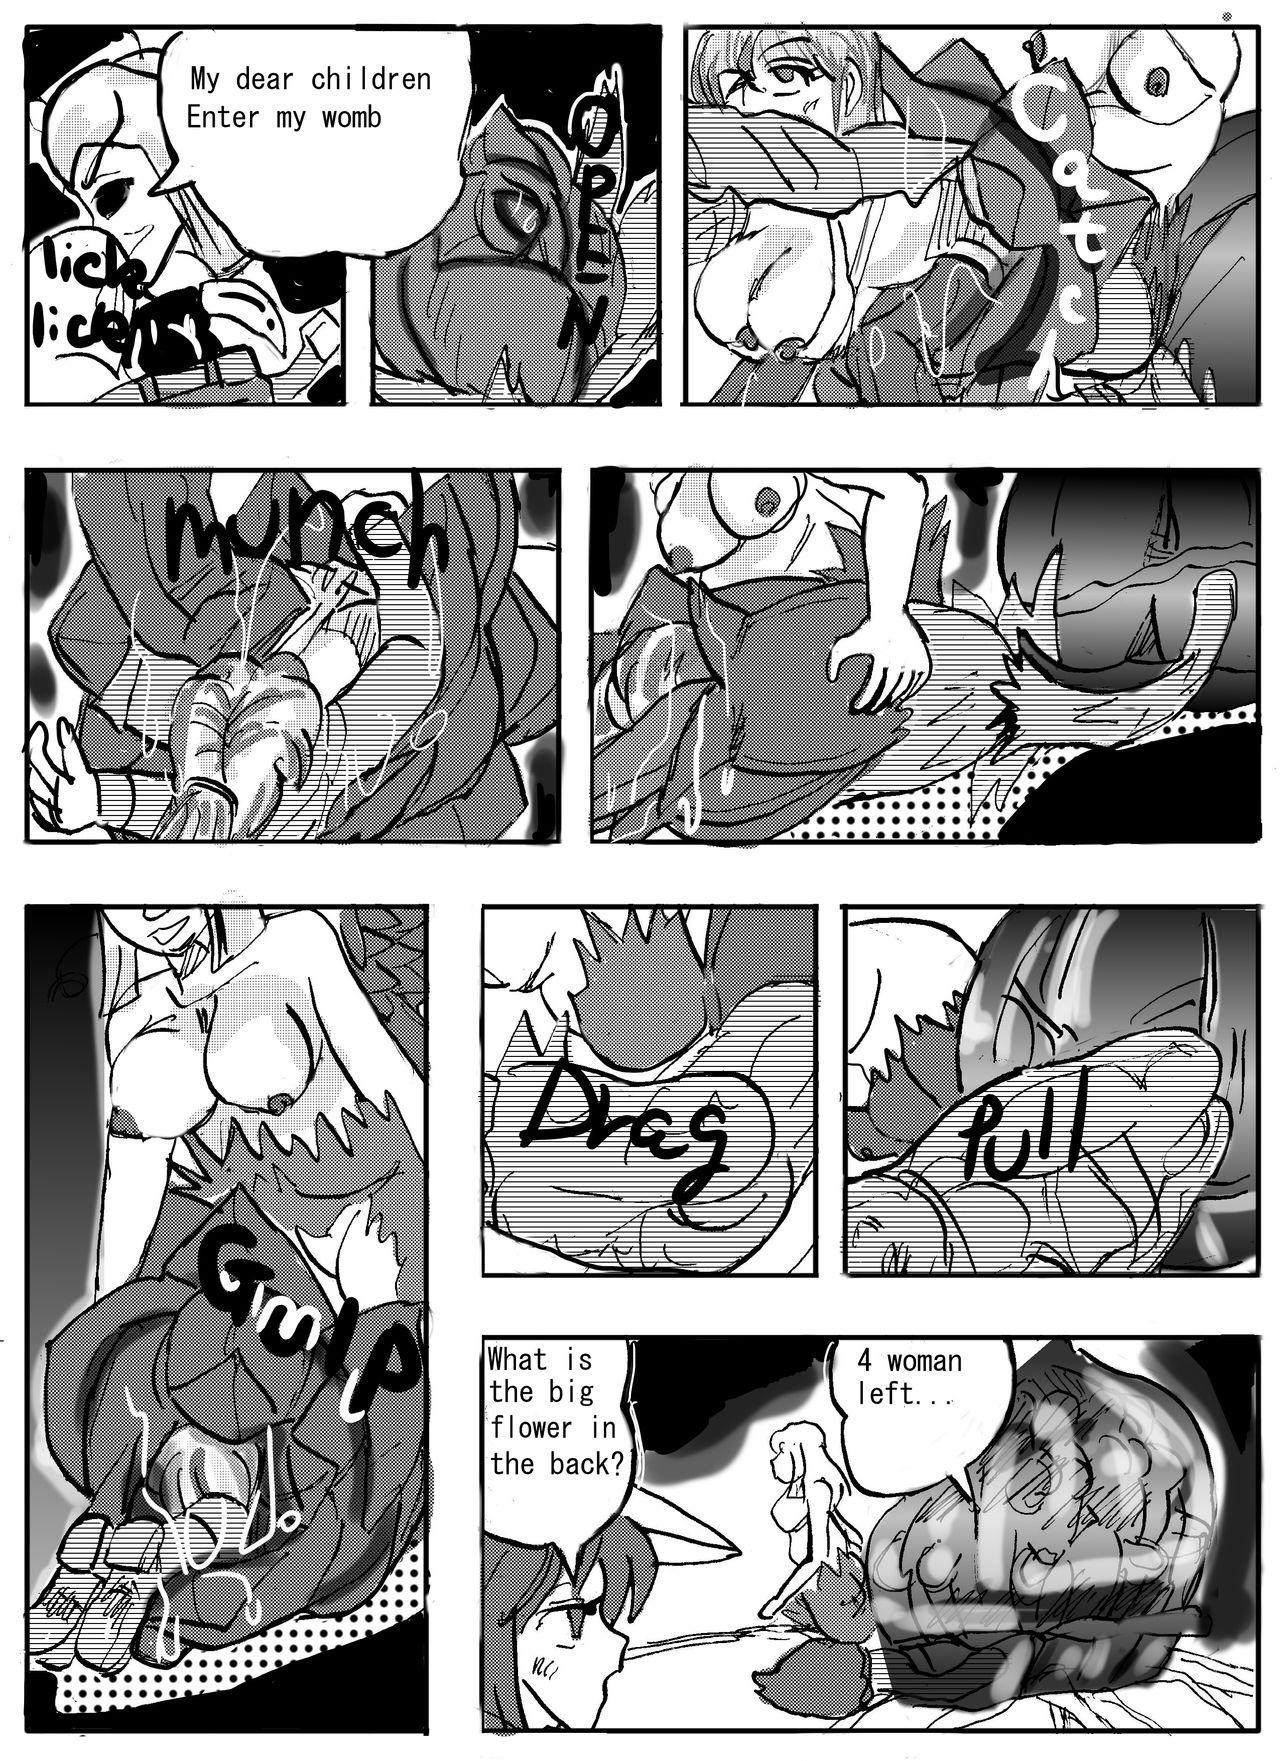 1080p Flower vore "Human and plant heterosexual ra*e and seed bed" - Original Hot Girl Fuck - Page 7